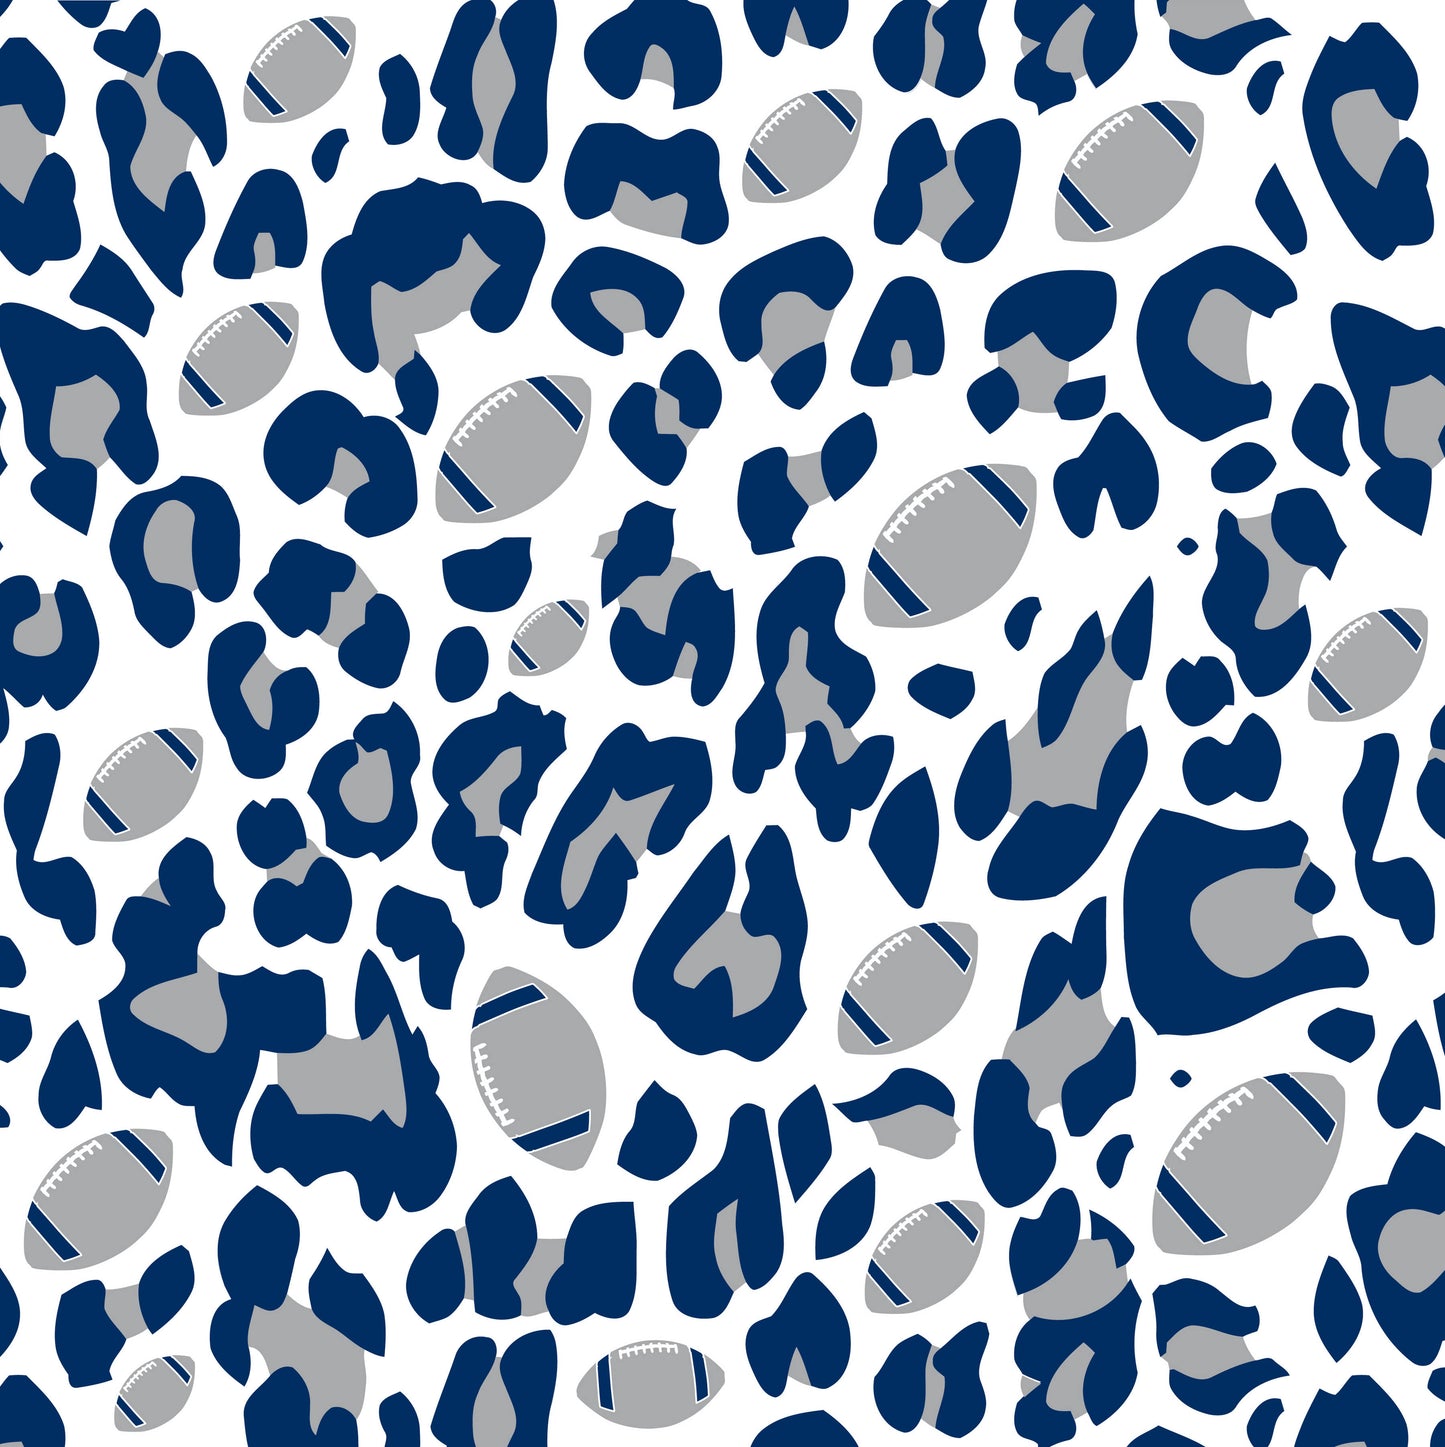 LEOPARD FOOTBALL PRINT - NAVY AND GREY 6